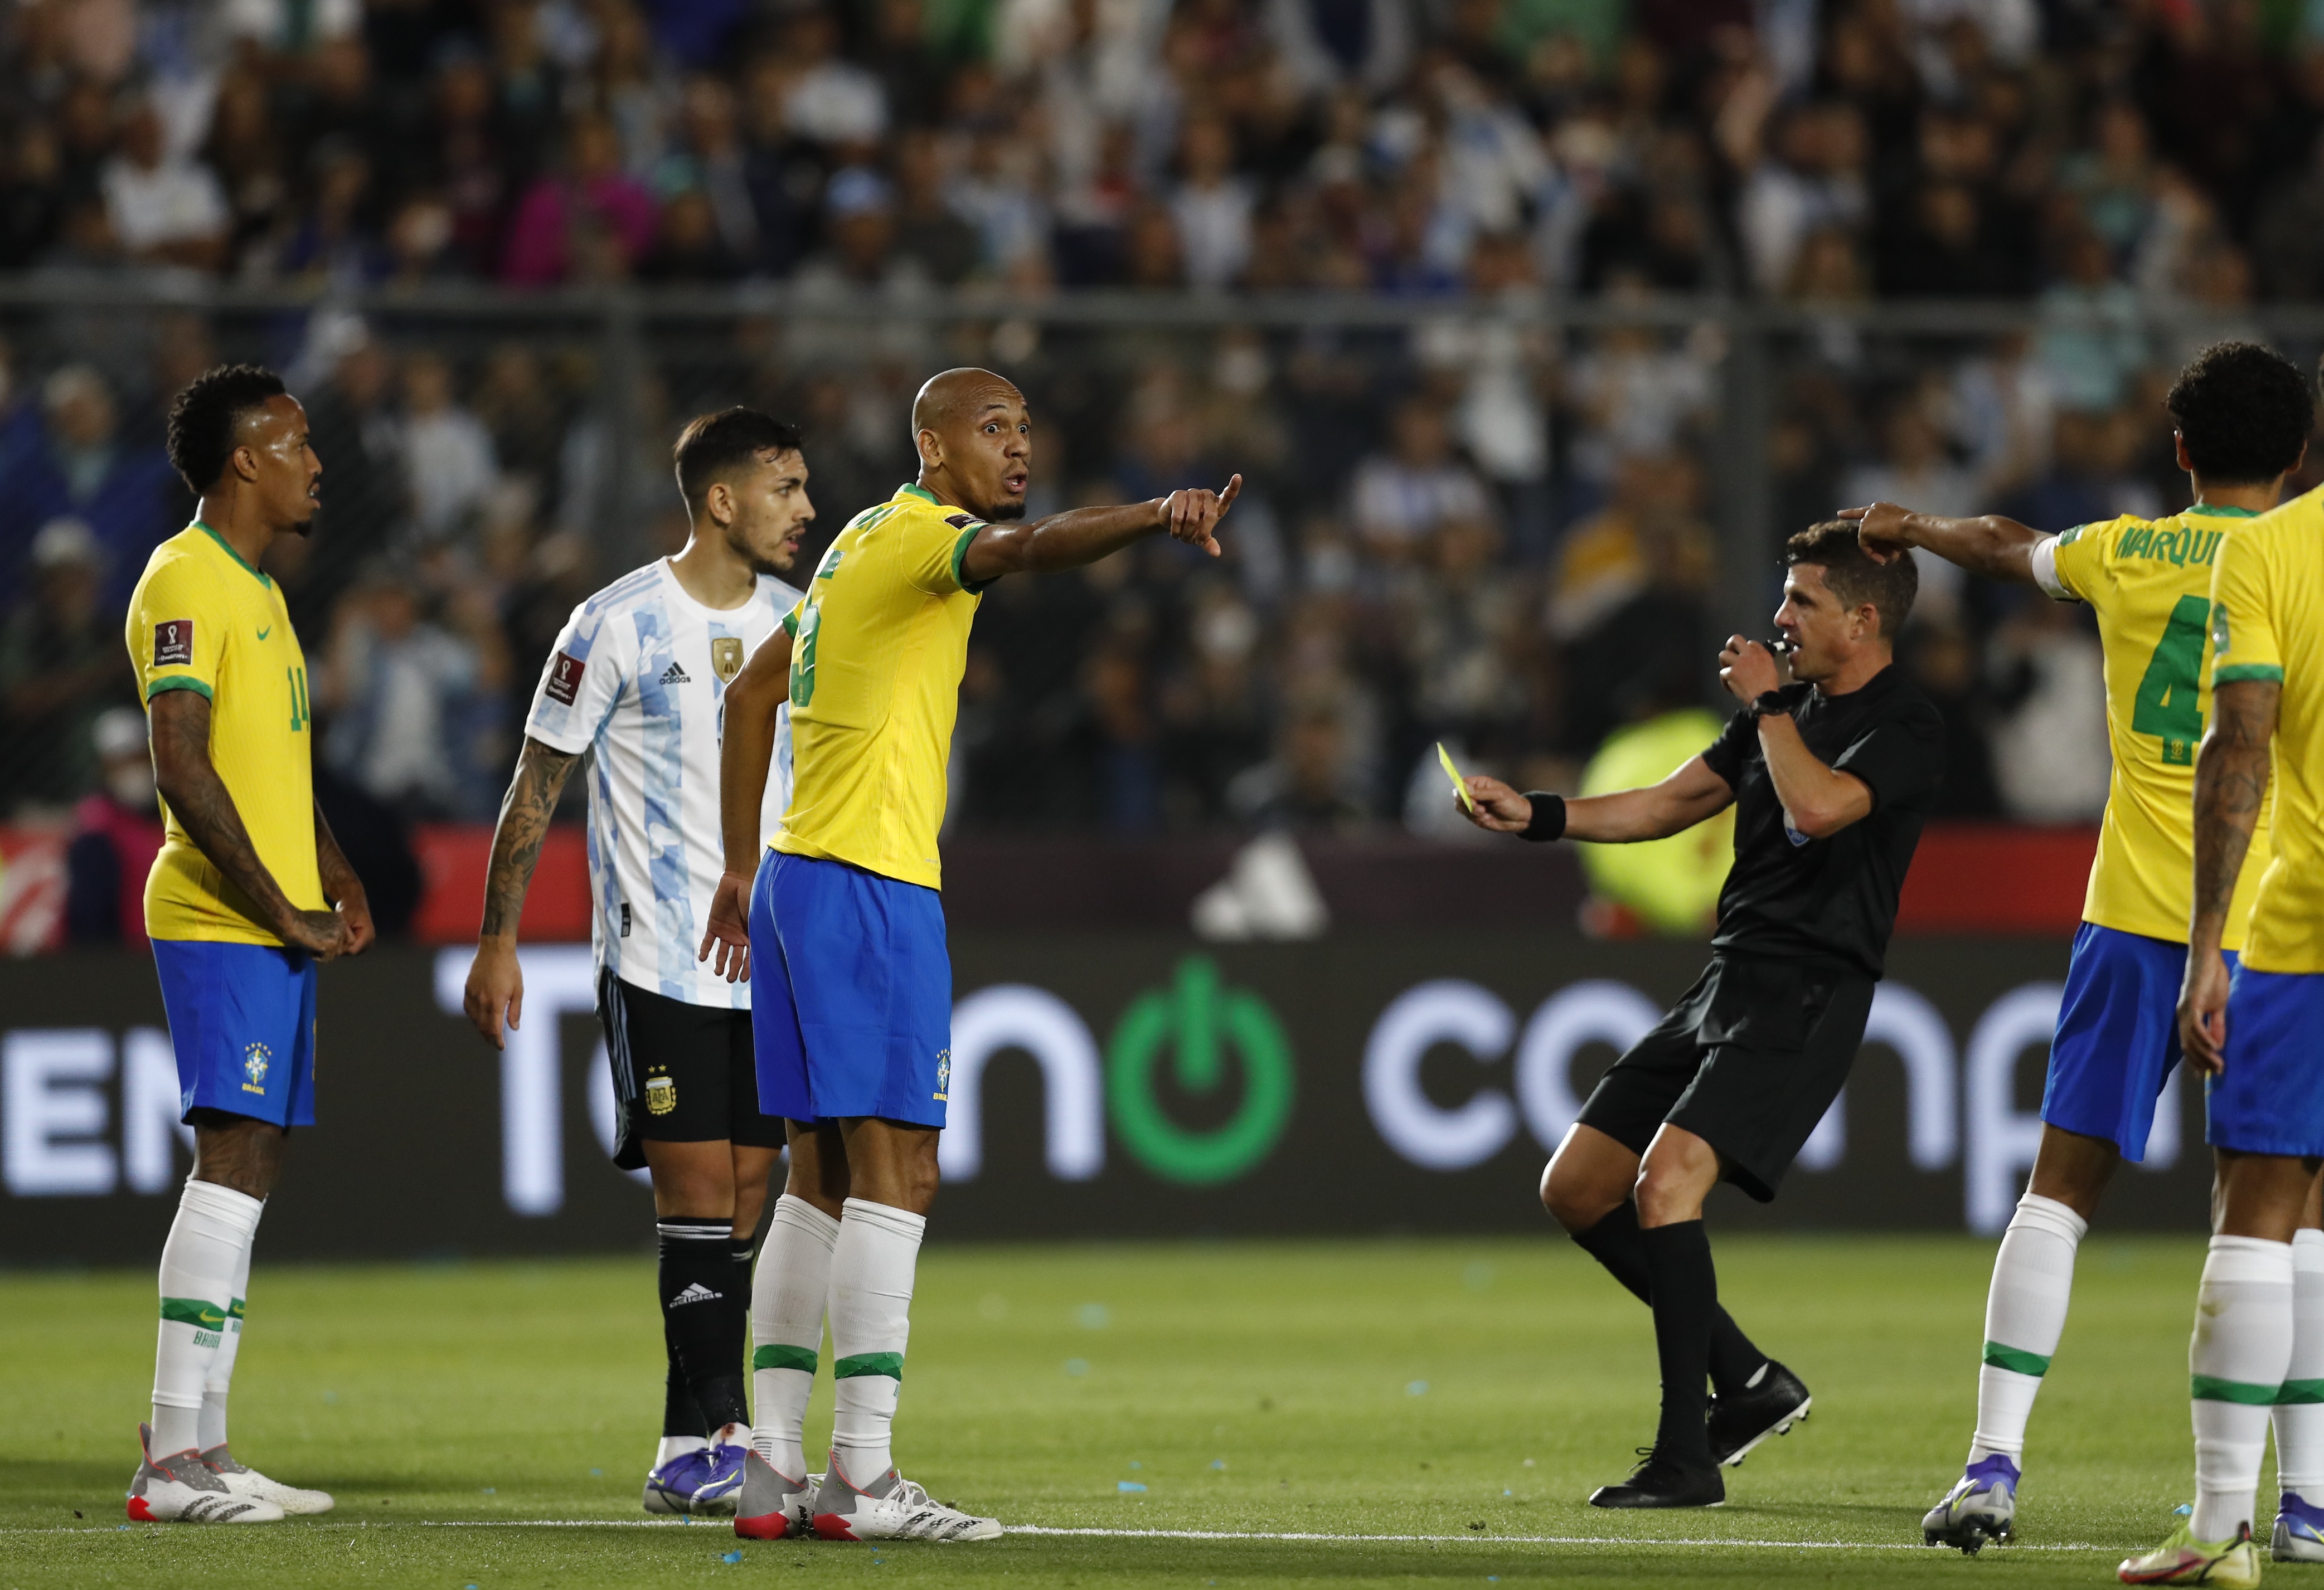 Brazil V Argentina Match Officials Suspended For Serious Errors Reuters